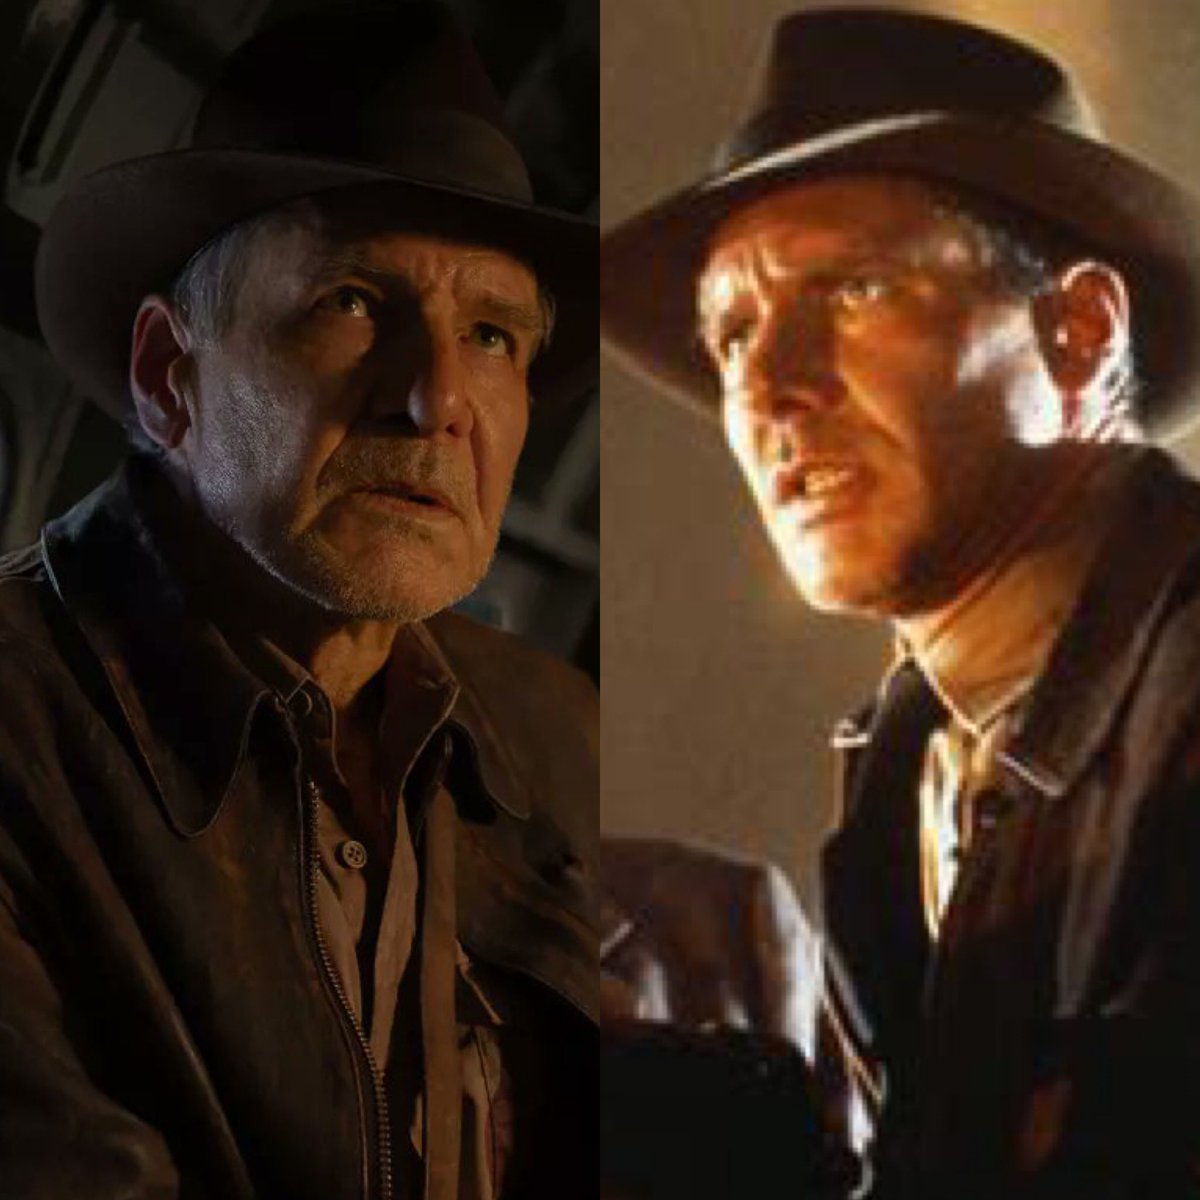 Did anyone else think of this shot from #LastCrusade when seeing the new pic? #IndianaJones #DialofDestiny